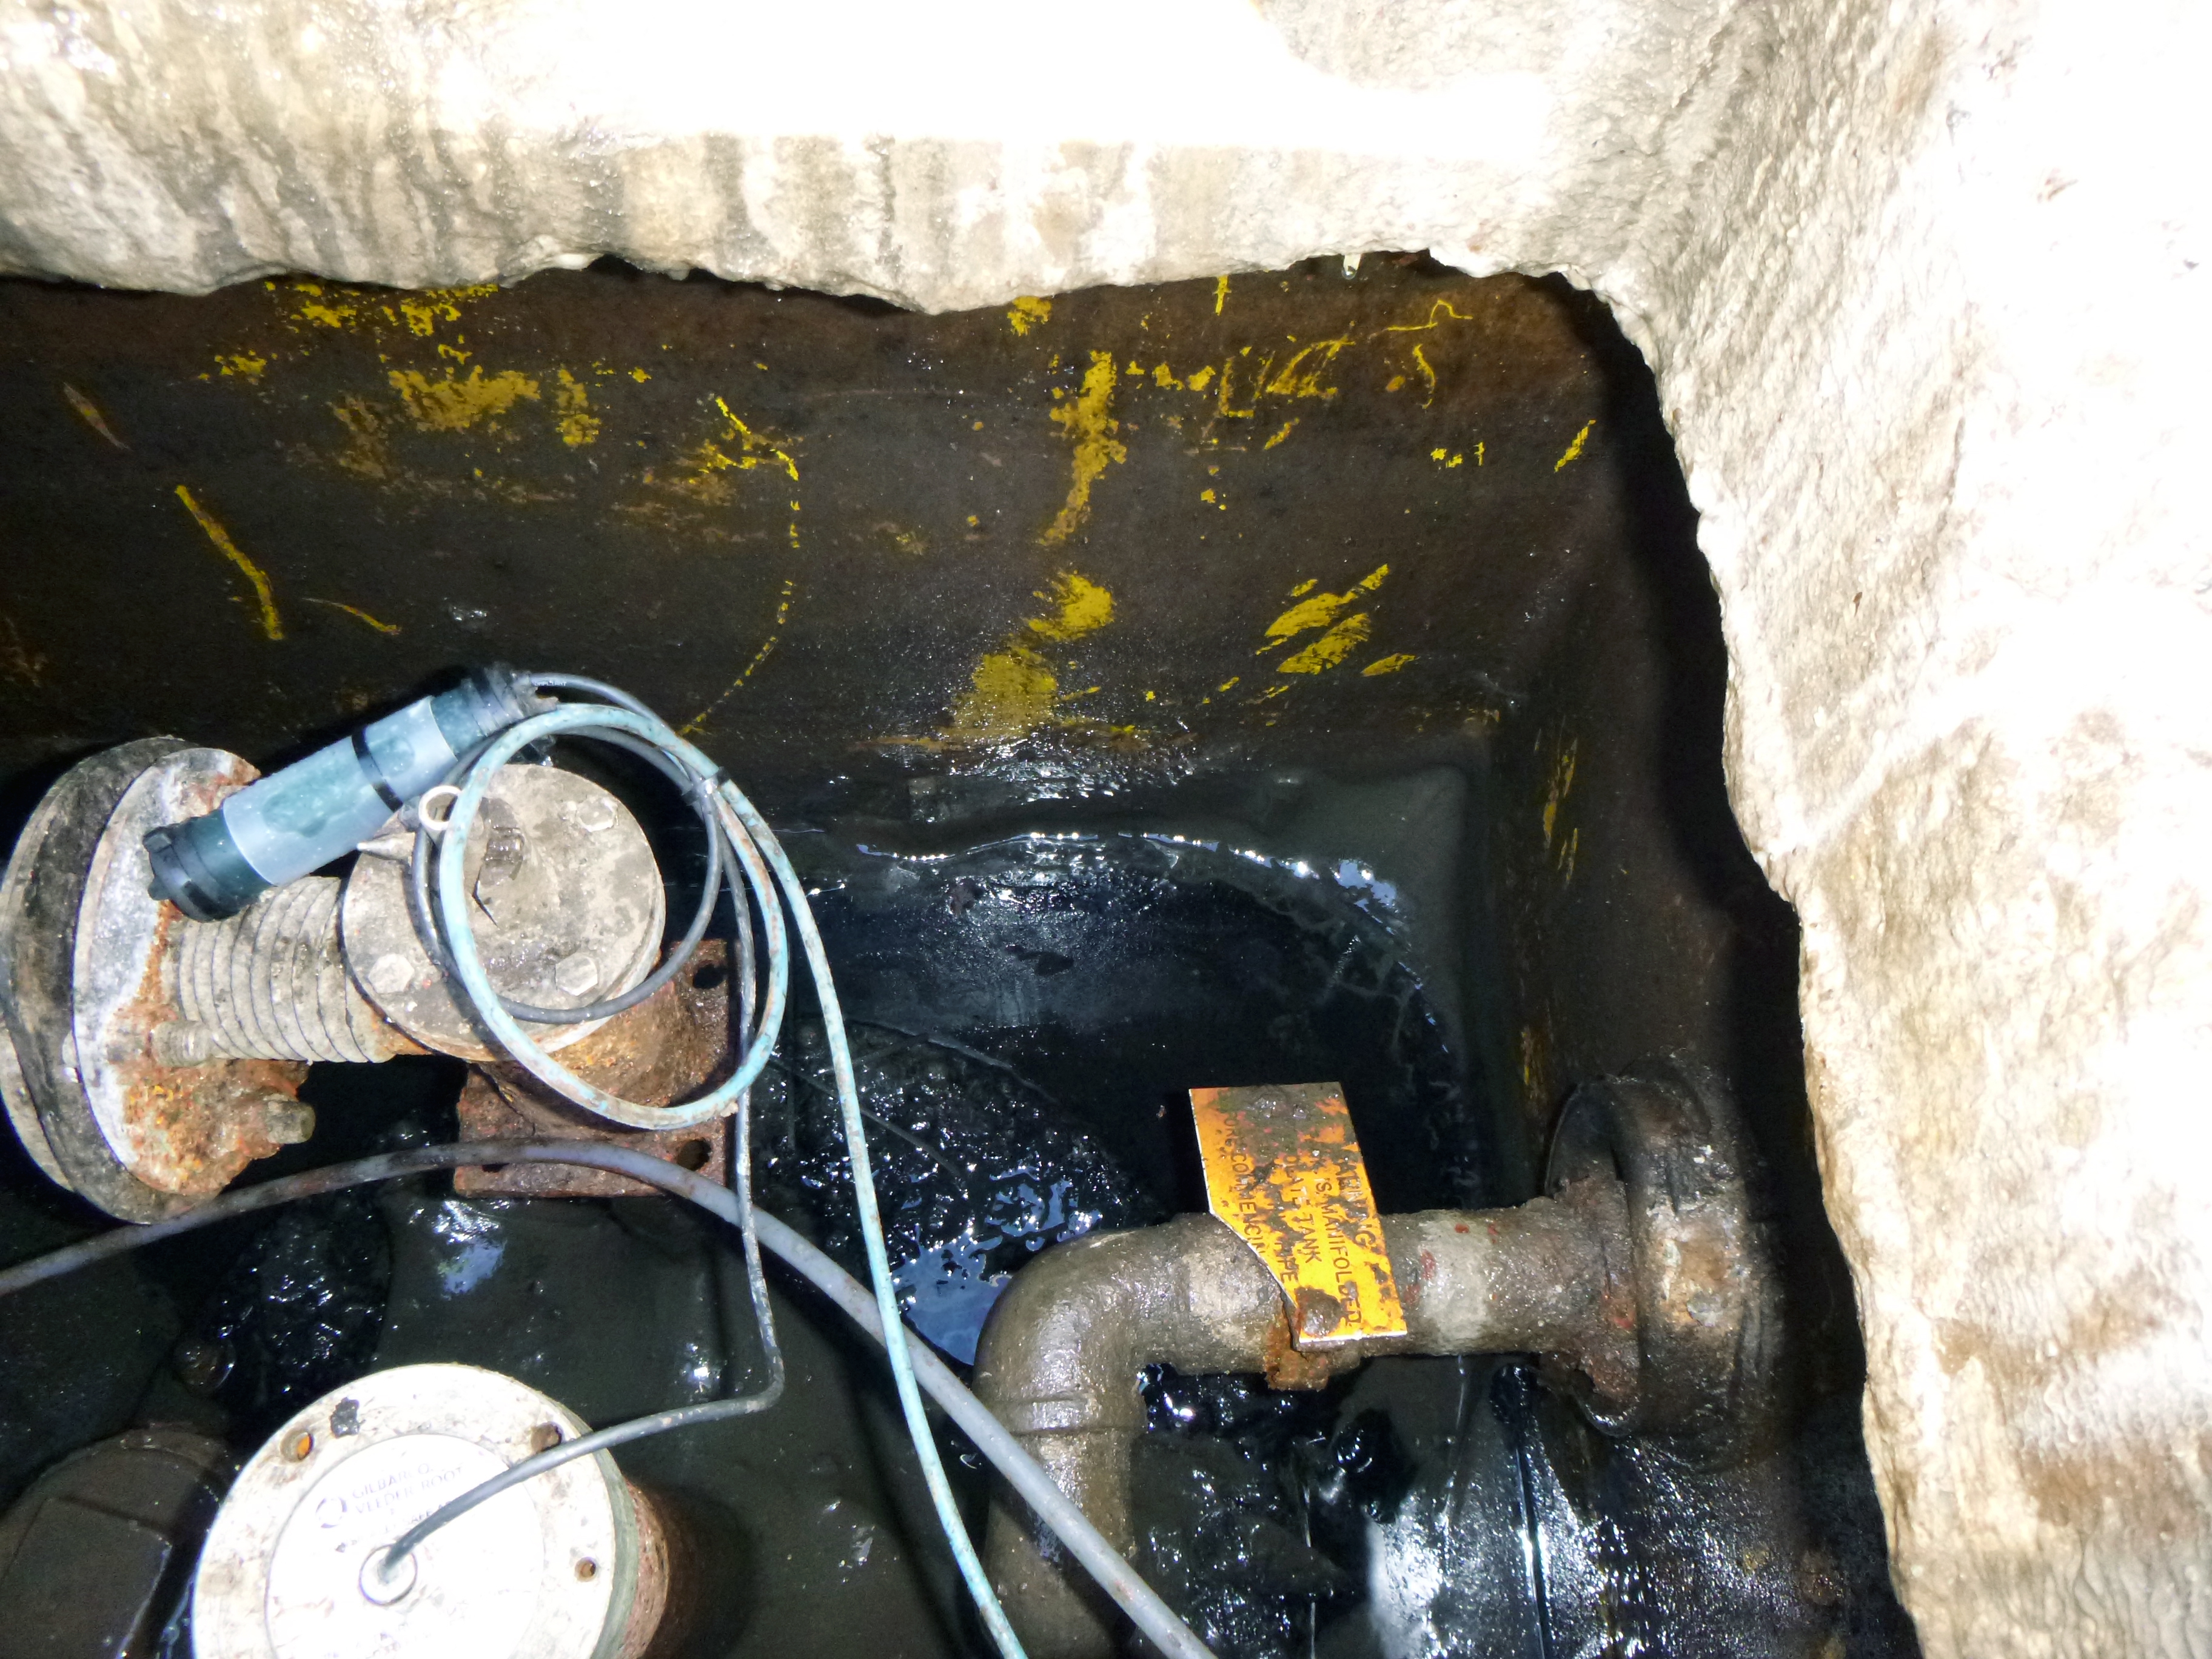 At this site, the old tank upstands were too small for the traditional bolt down chambers tank sumps / chambers